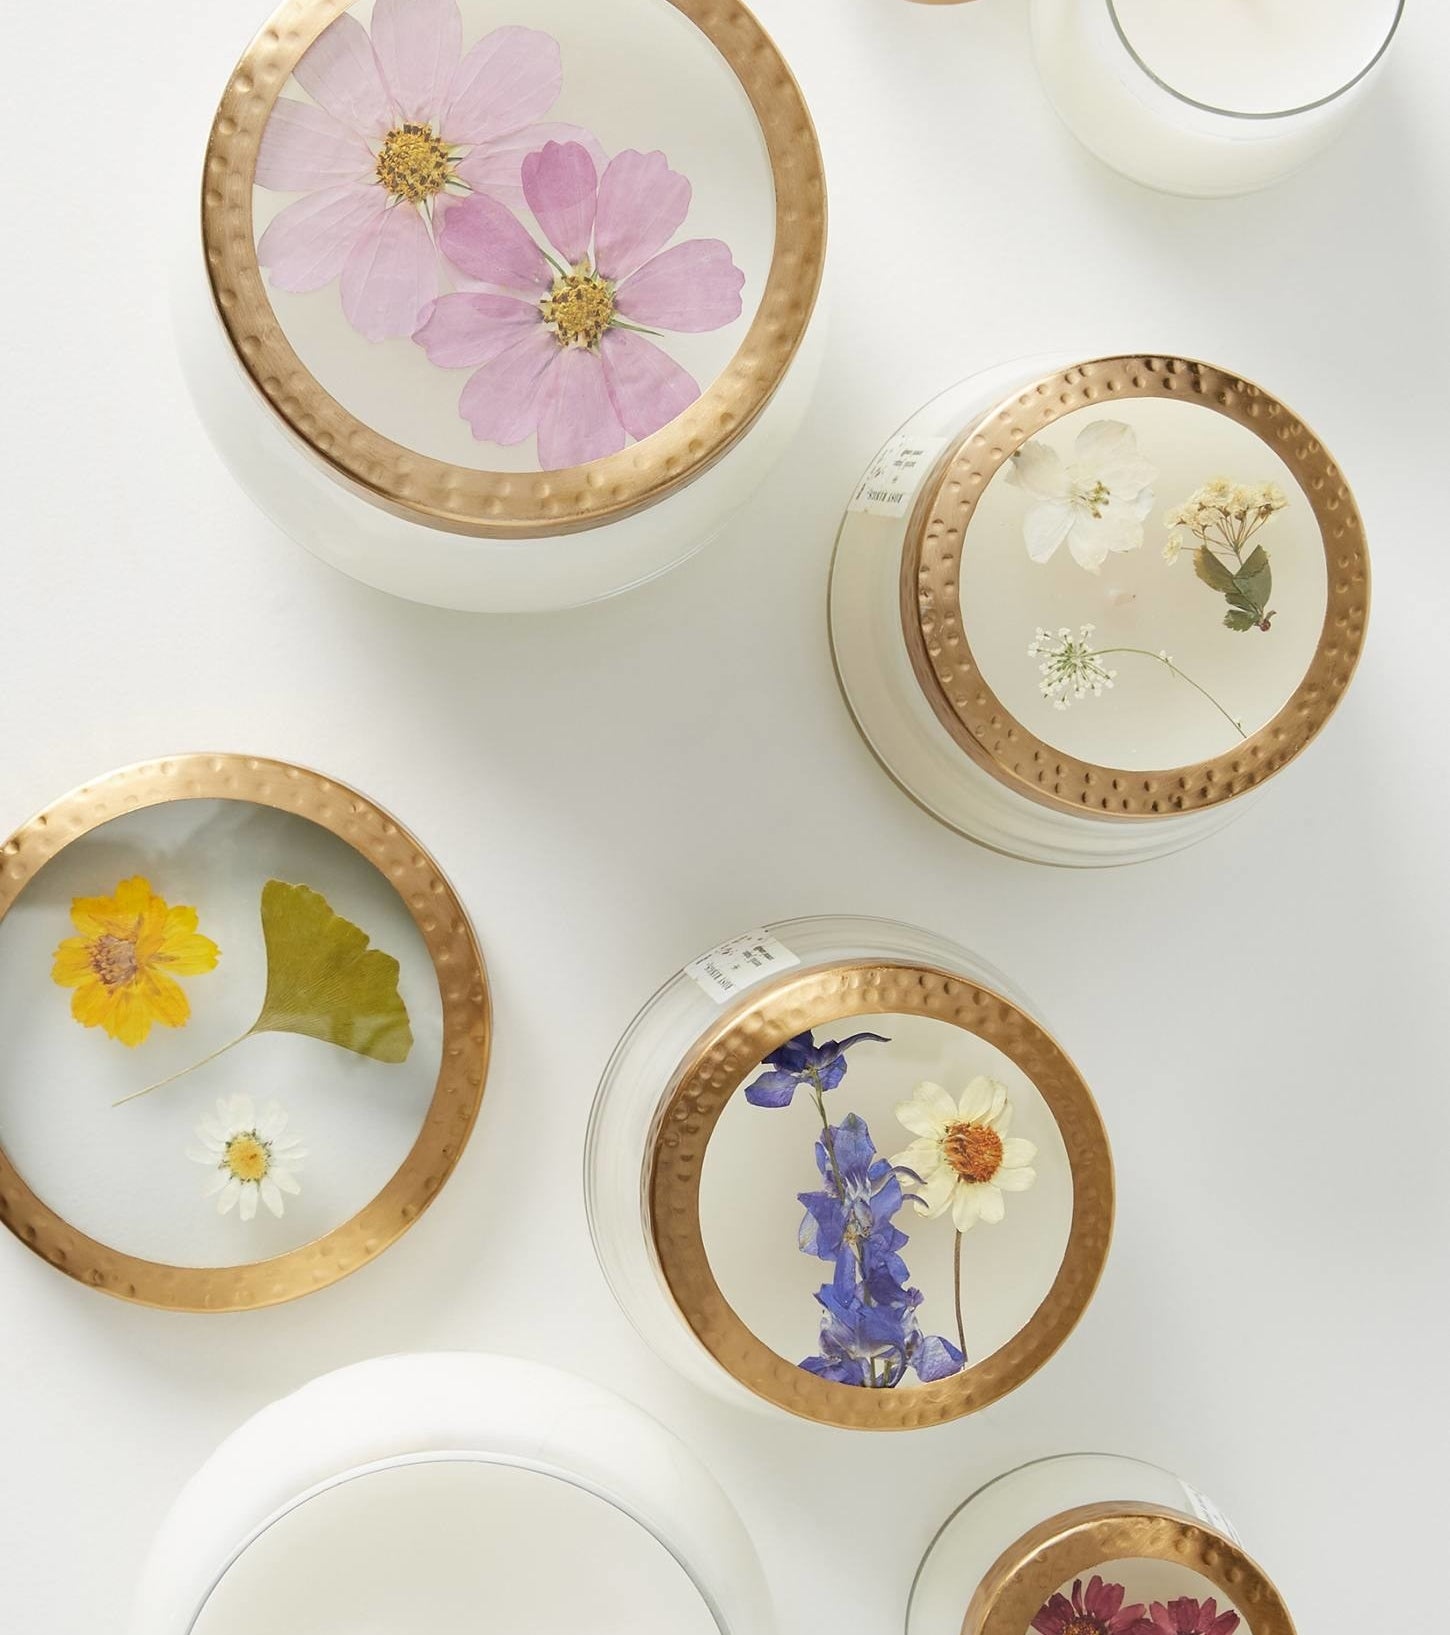 Candles of different sizes with various pressed flowers displayed on the lid